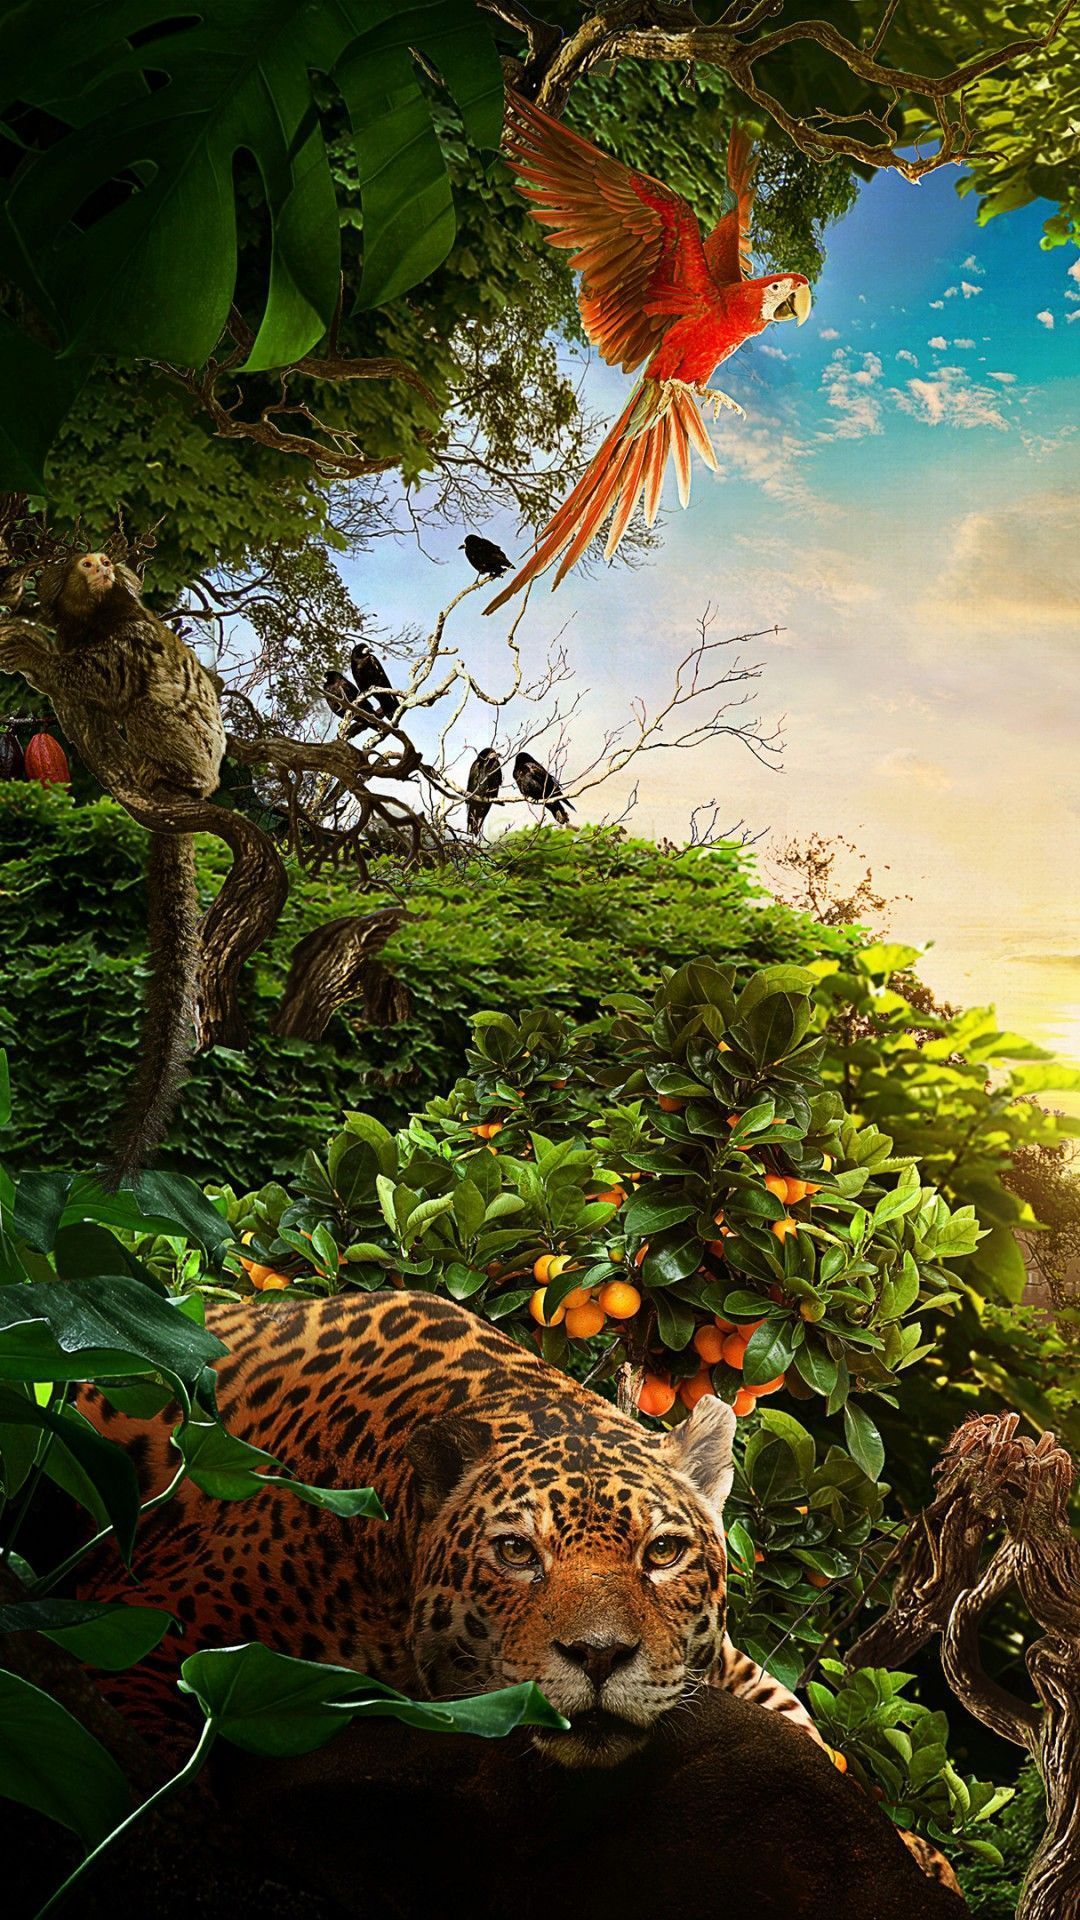 A jungle scene with animals and trees - Jungle